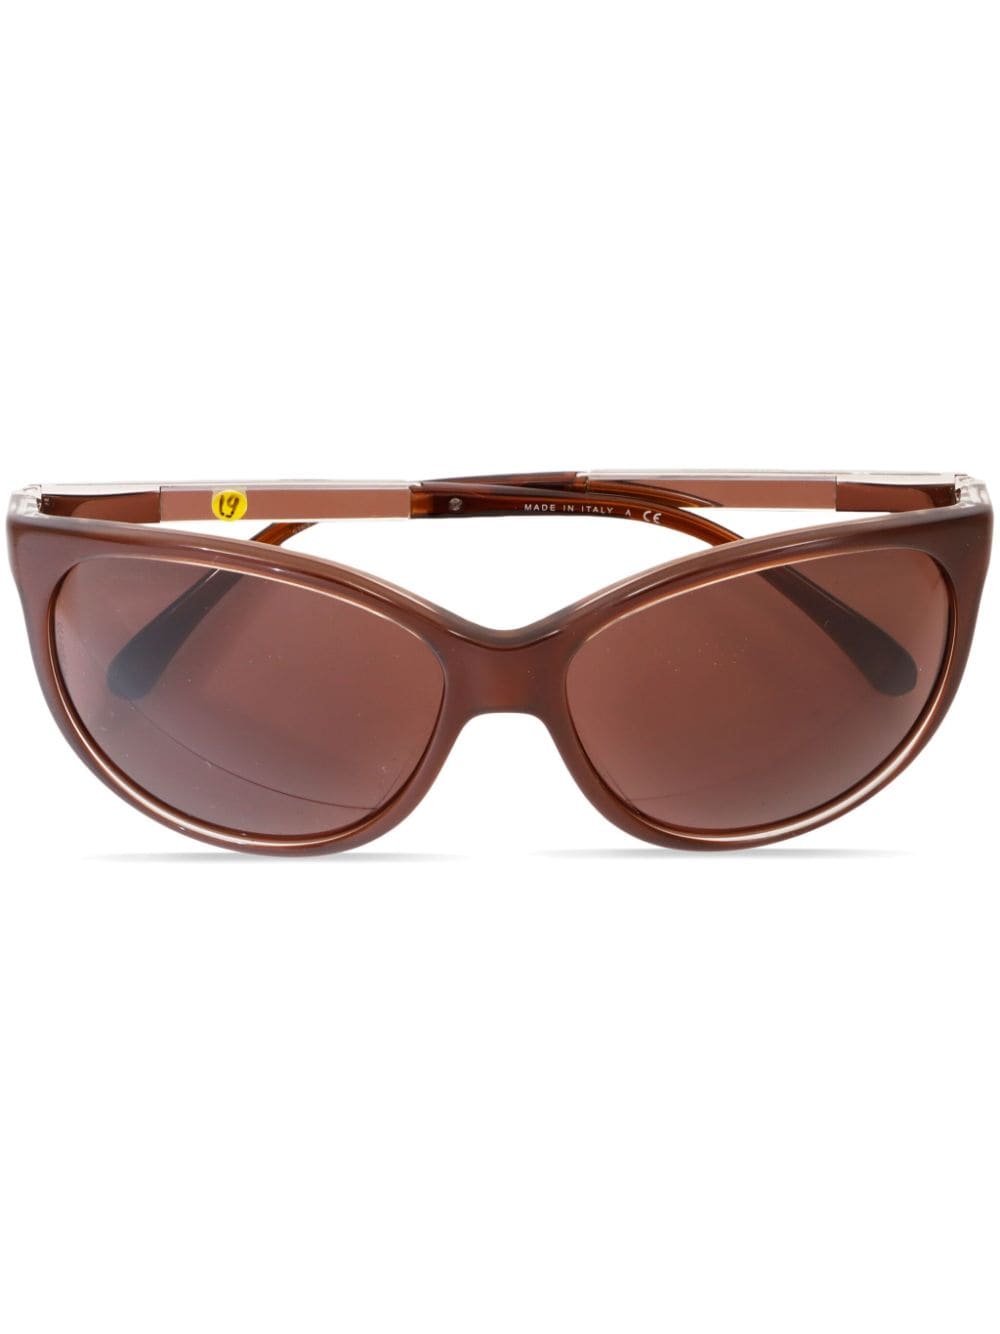 CHANEL Pre-Owned 2010s cat-eye sunglasses - Brown